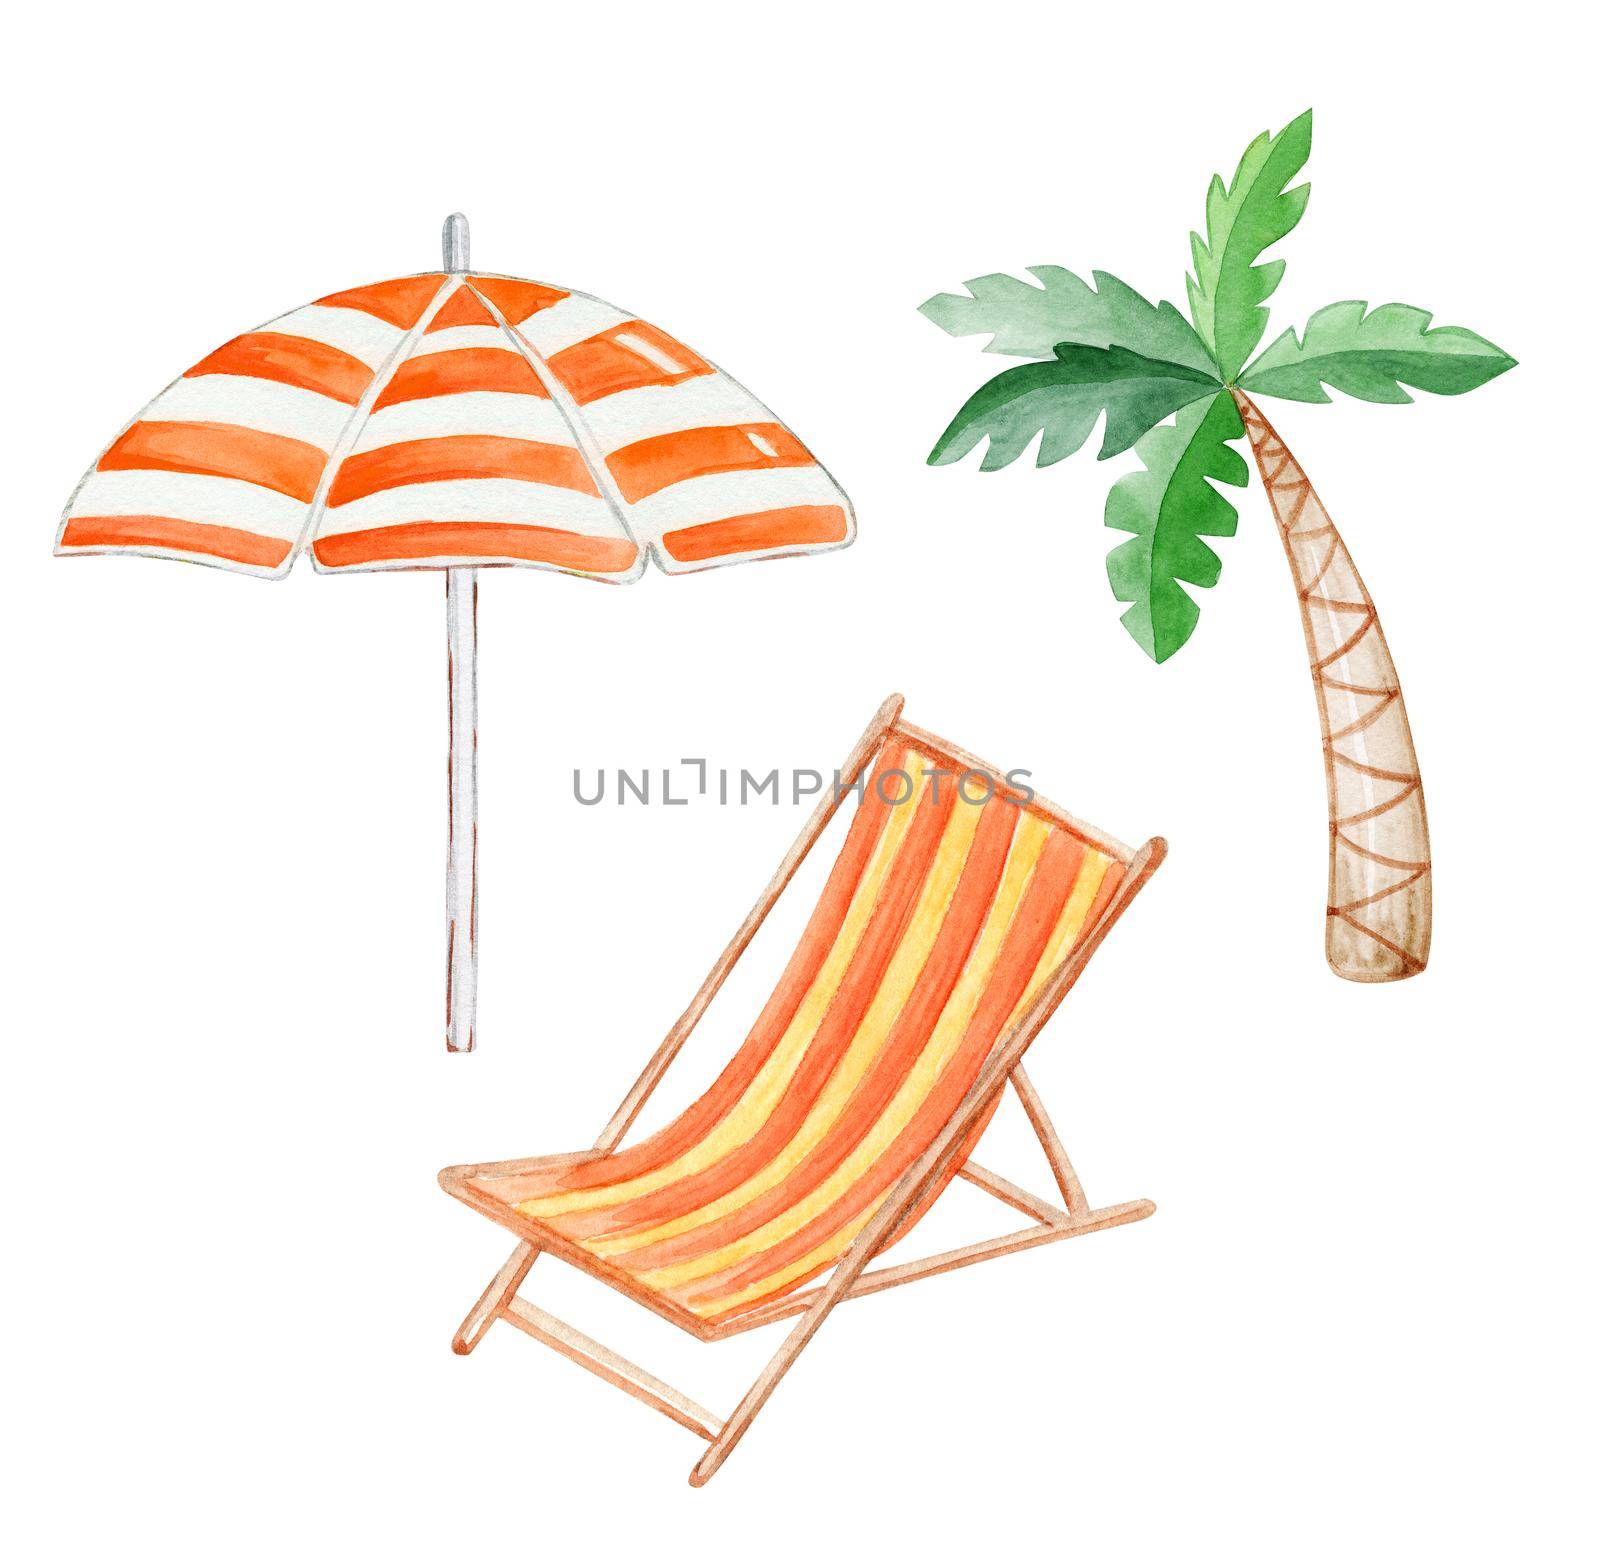 Watercolor deckchair, parasol and palm set isolated on white background. Summer beach Tourism hand drawn illustration by dreamloud